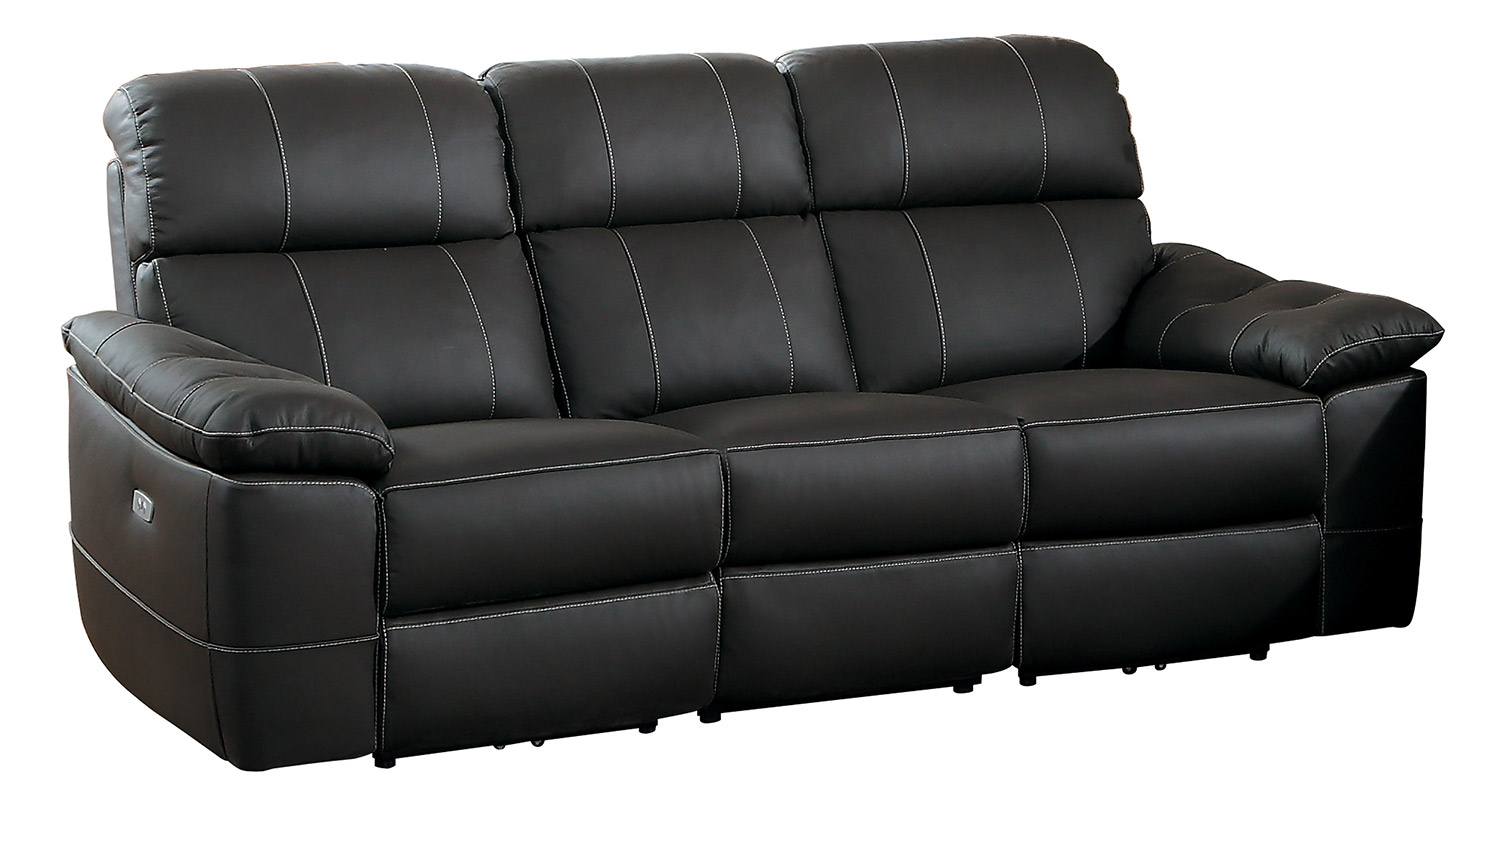 Homelegance Nicasio Power Double Reclining Sofa - Dark Brown Leather